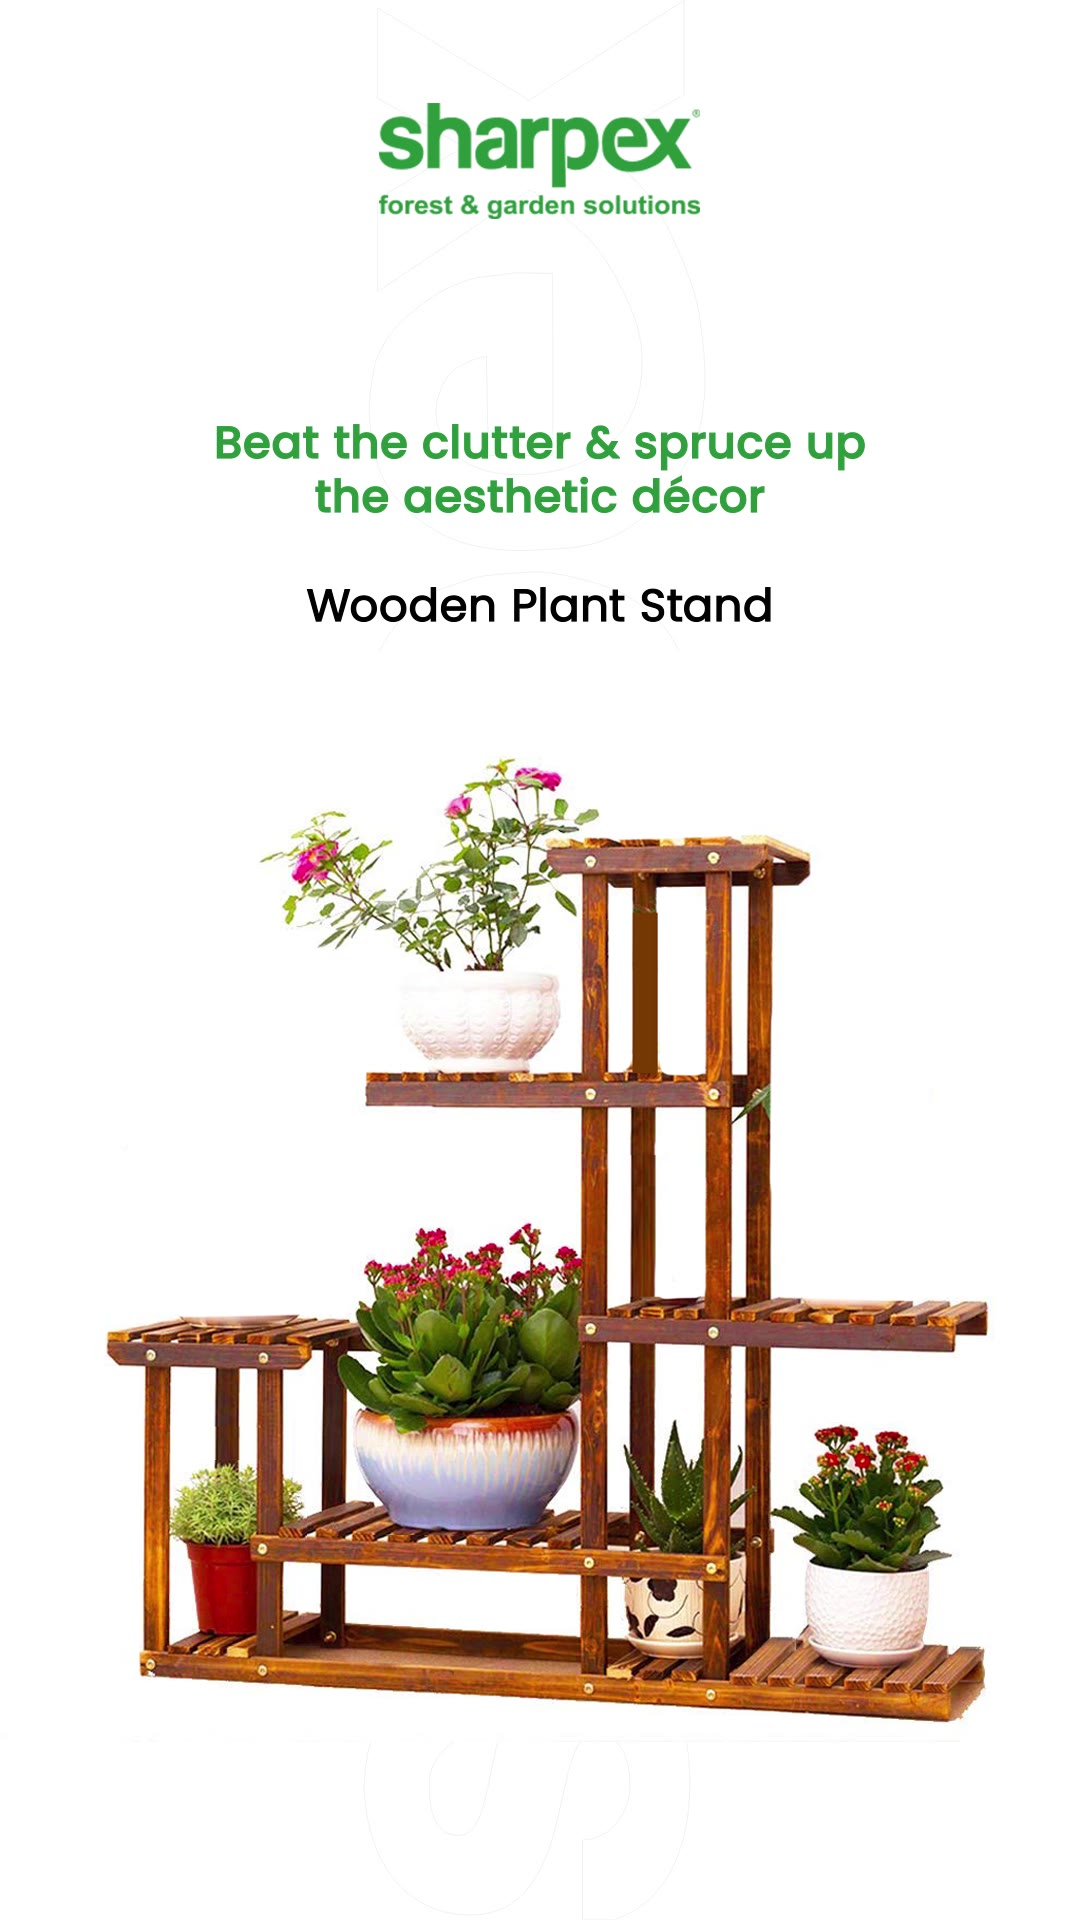 Beat the clutter & spruce up the aesthetic décor.

Bring home the wonderful wooden plant stand!

#WoodenPlantStand #Reels #ReelsOfInstagram #ReelLovers #PlantDecor #GardeningAccessories #GardeningTools #ModernGardeningTools #GardeningProducts #GardenProducts #Sharpex #SharpexIndia